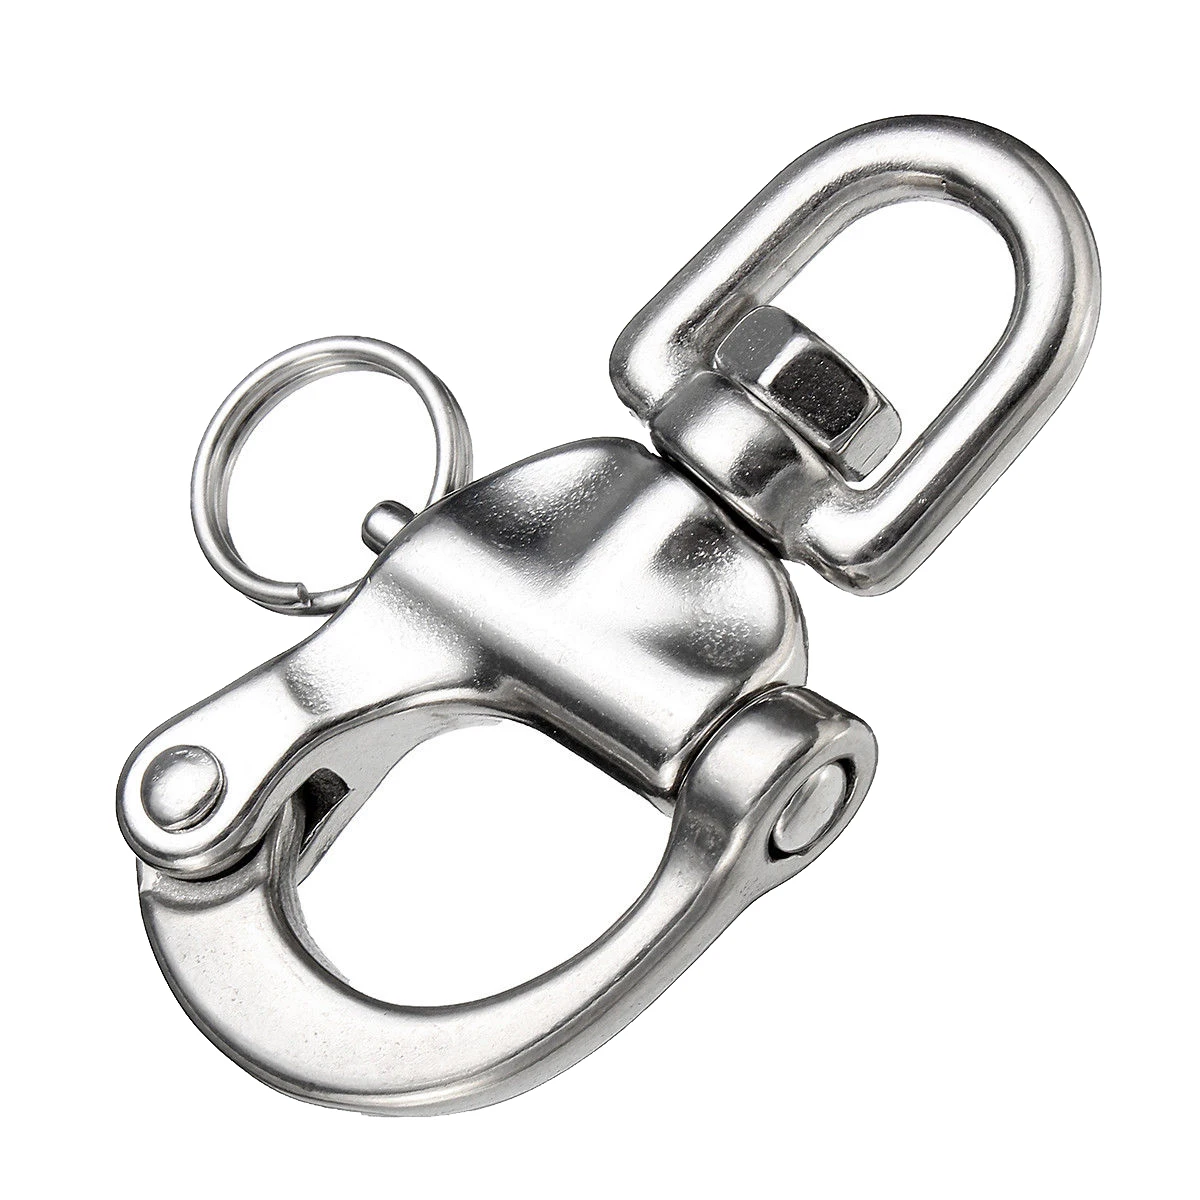 

Stainless Steel Swivel Shackle Quick Release Boat Anchor Chain Eye Shackle Swivel Snap Hook for Marine Architectural